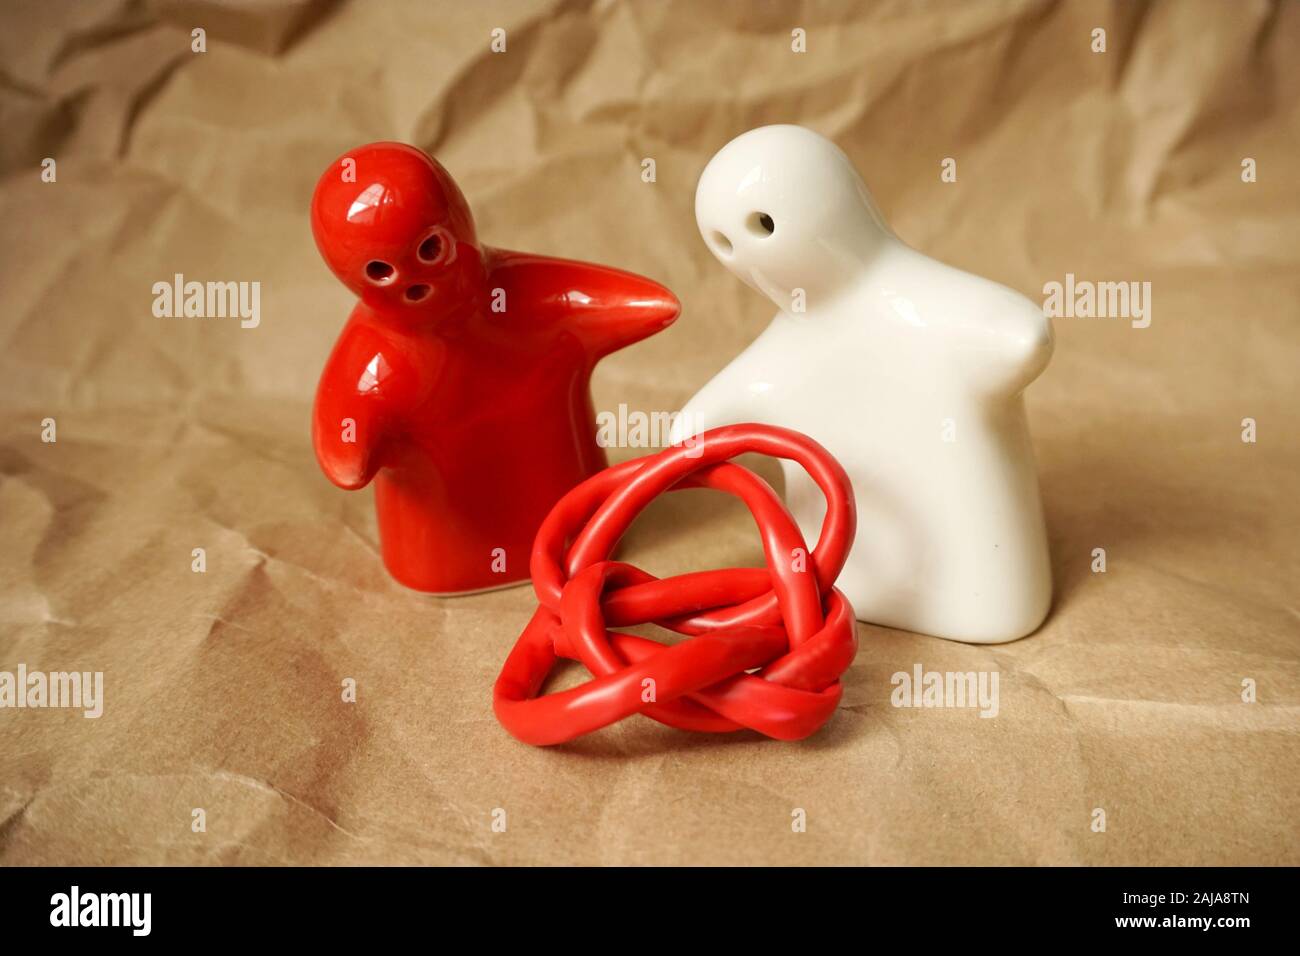 Tangled red wire between two ceramic figurines as humans with free copy space Stock Photo